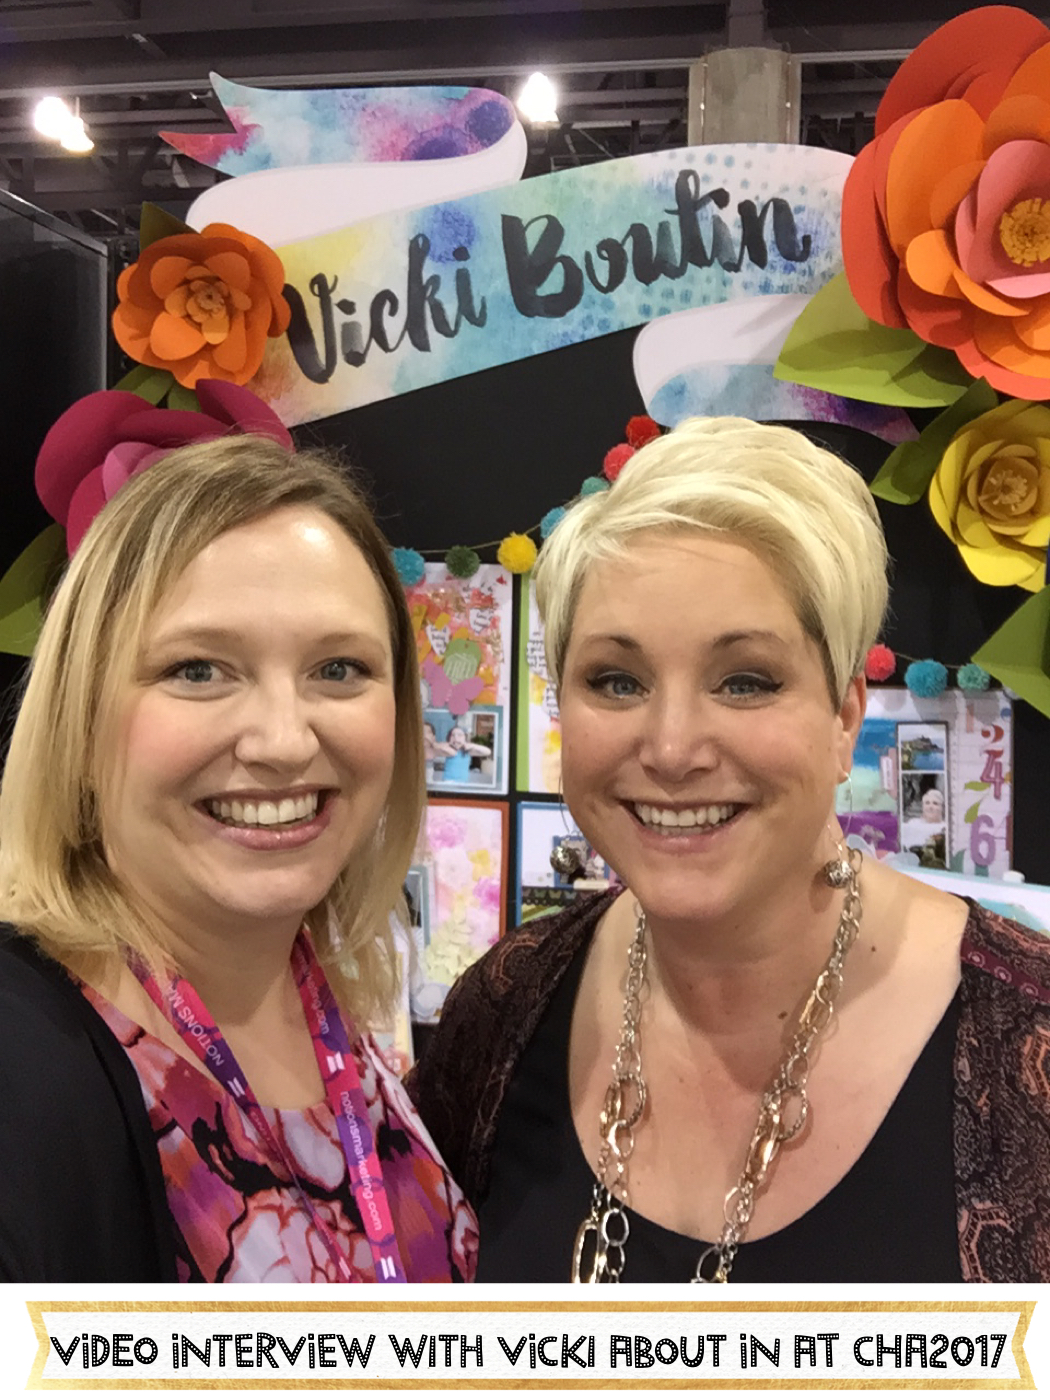 Video interview with Vicki Boutin at CHA2017 Creativation. #mixedmedia #scrapbooking #CHA2017 #creativation #vickiboutin